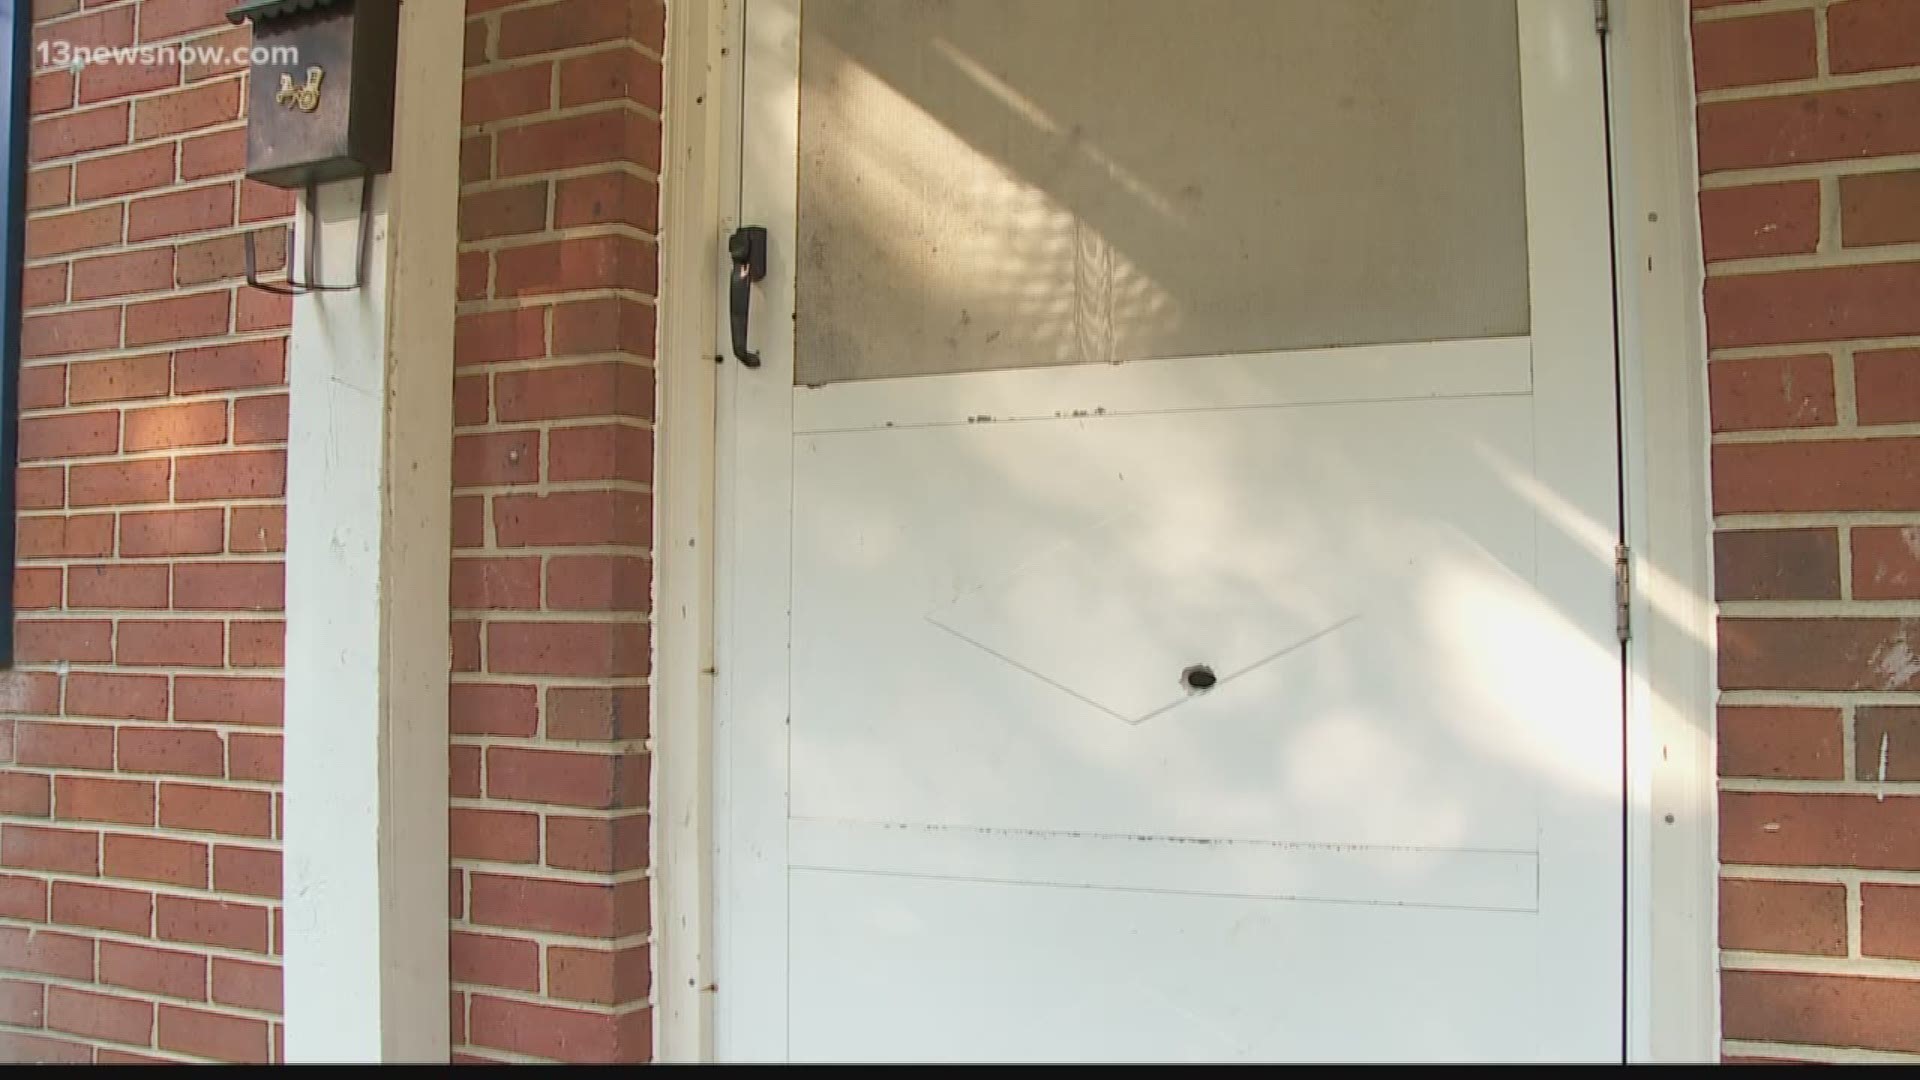 A push to revitalize the Phoebus area of Hampton took a hit overnight when a number of homes and cars were shot at. Jaclyn Lee has more.